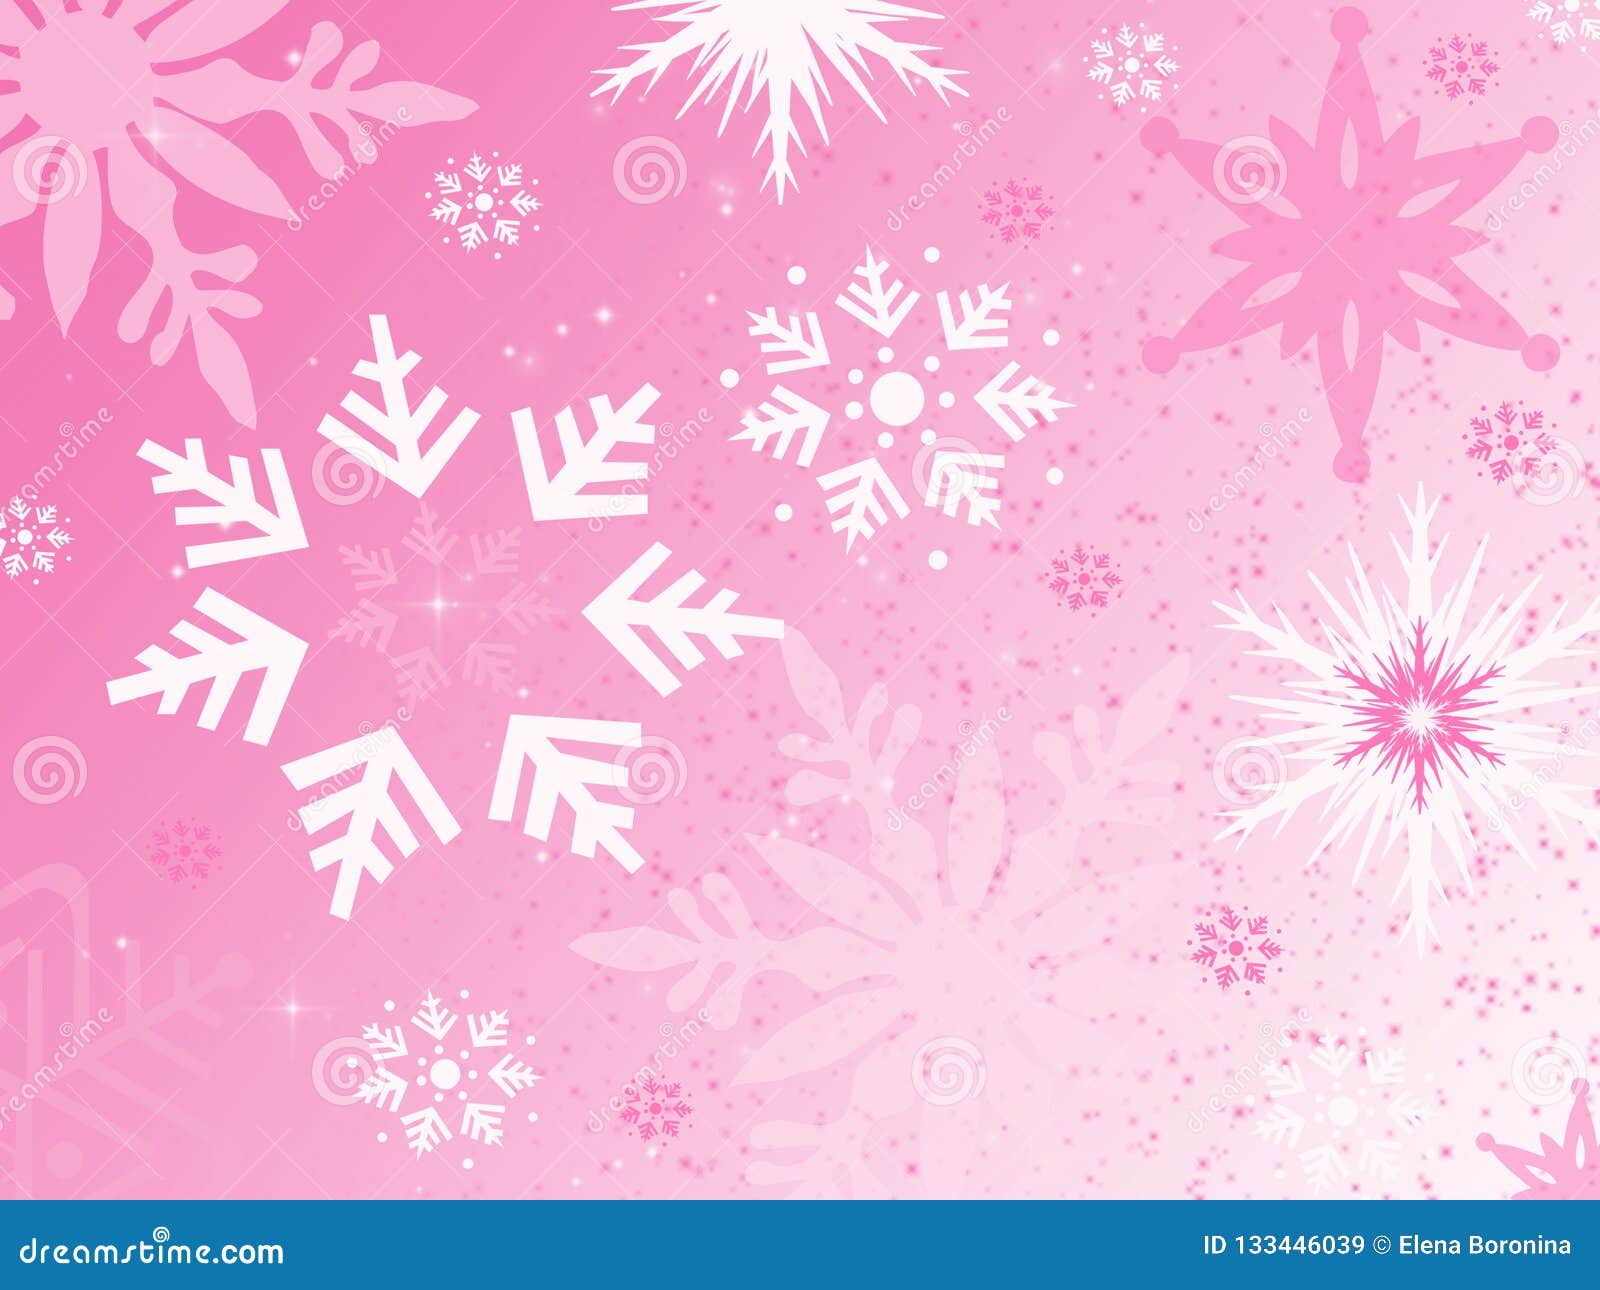 White and Pink Snowflakes on Pink Background, Illustration Stock ...